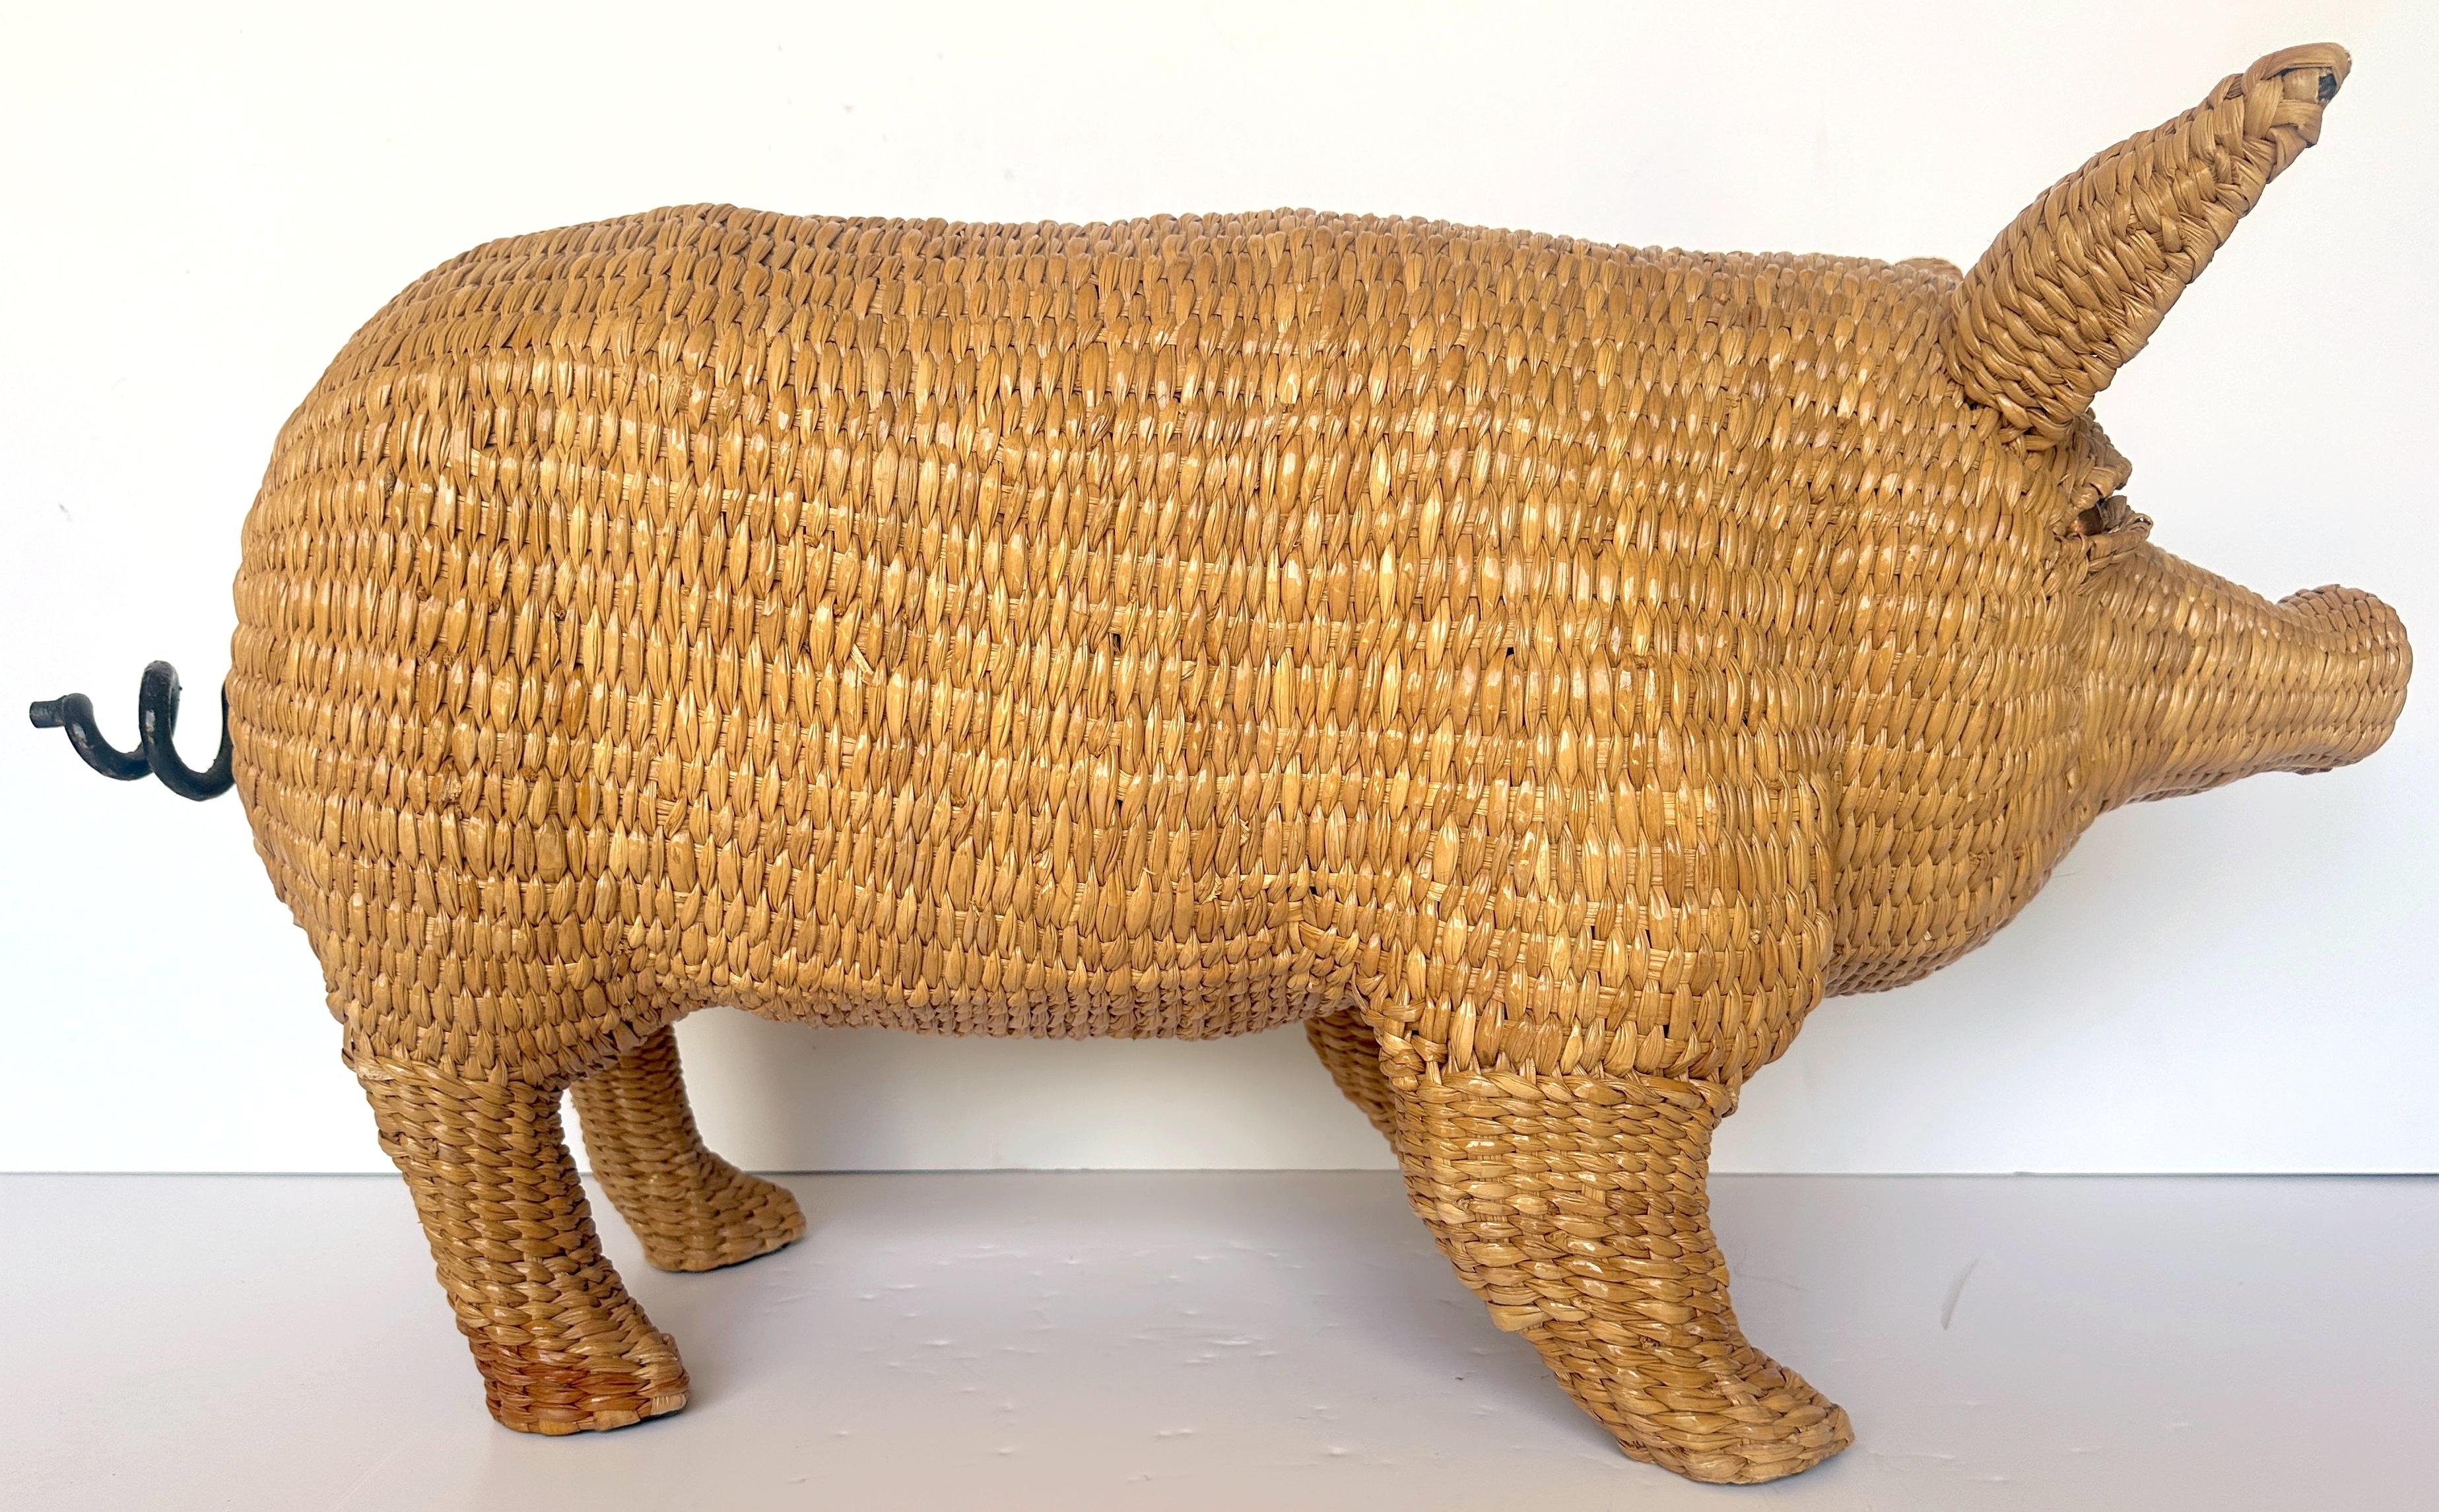 Mario Lopez Torres Pig Sculpture, Signed c. 1970s
A exquisite vintage Mario Lopez Torres Pig Sculpture, signed and dated circa 1970s, this captivating piece exudes charm and character. Crafted of woven wicker, this near-life-size pig sculpture